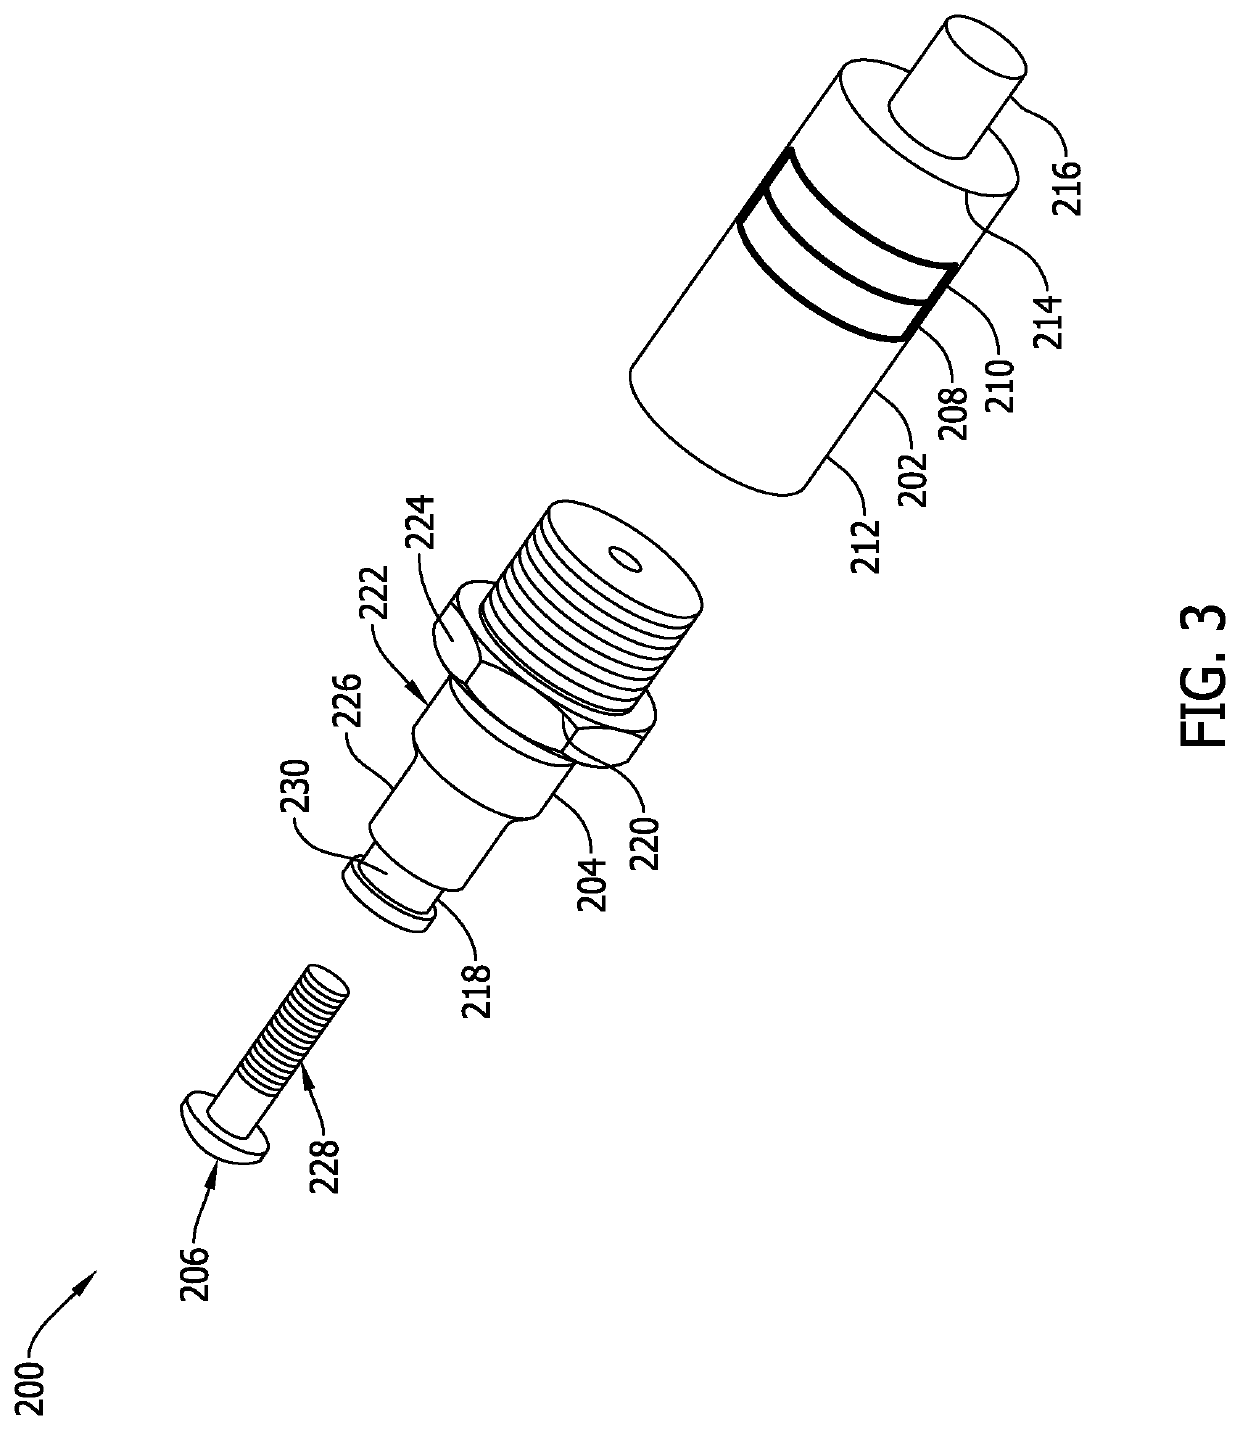 System and method for a helical pressure snubber